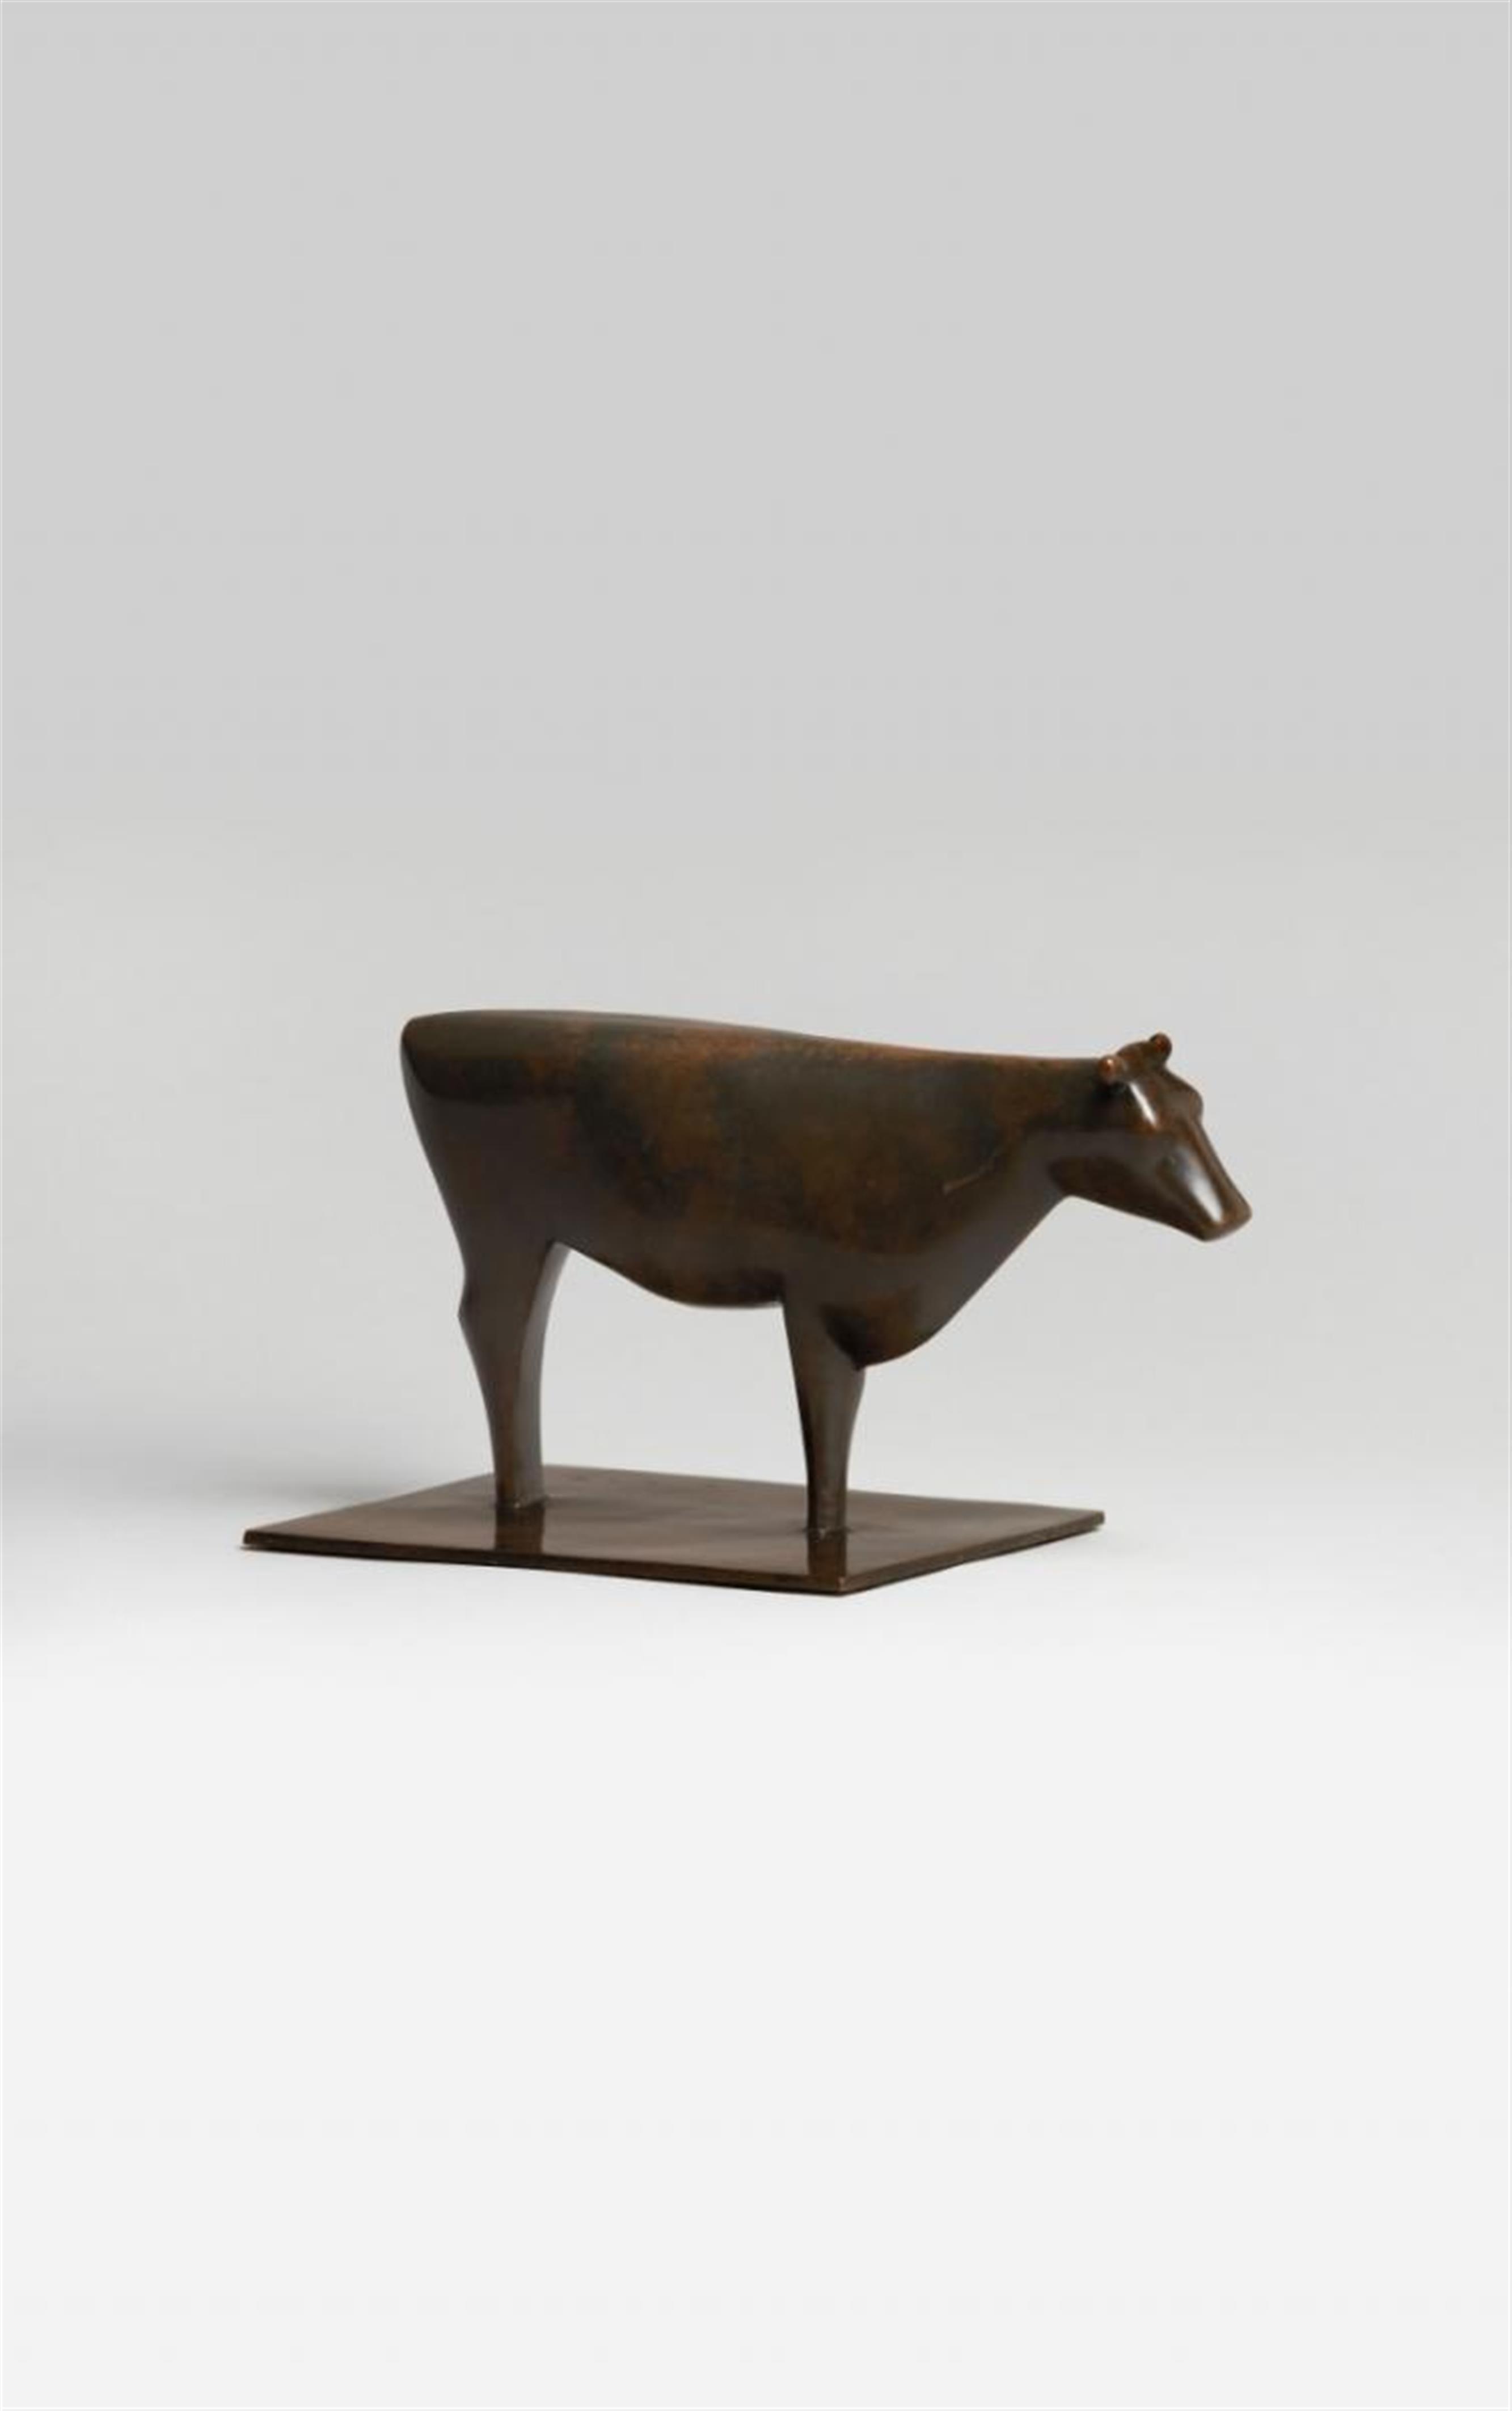 Ewald Mataré - Stehende Kuh 'Windkuh' (Standing cow 'Windcow') - image-1